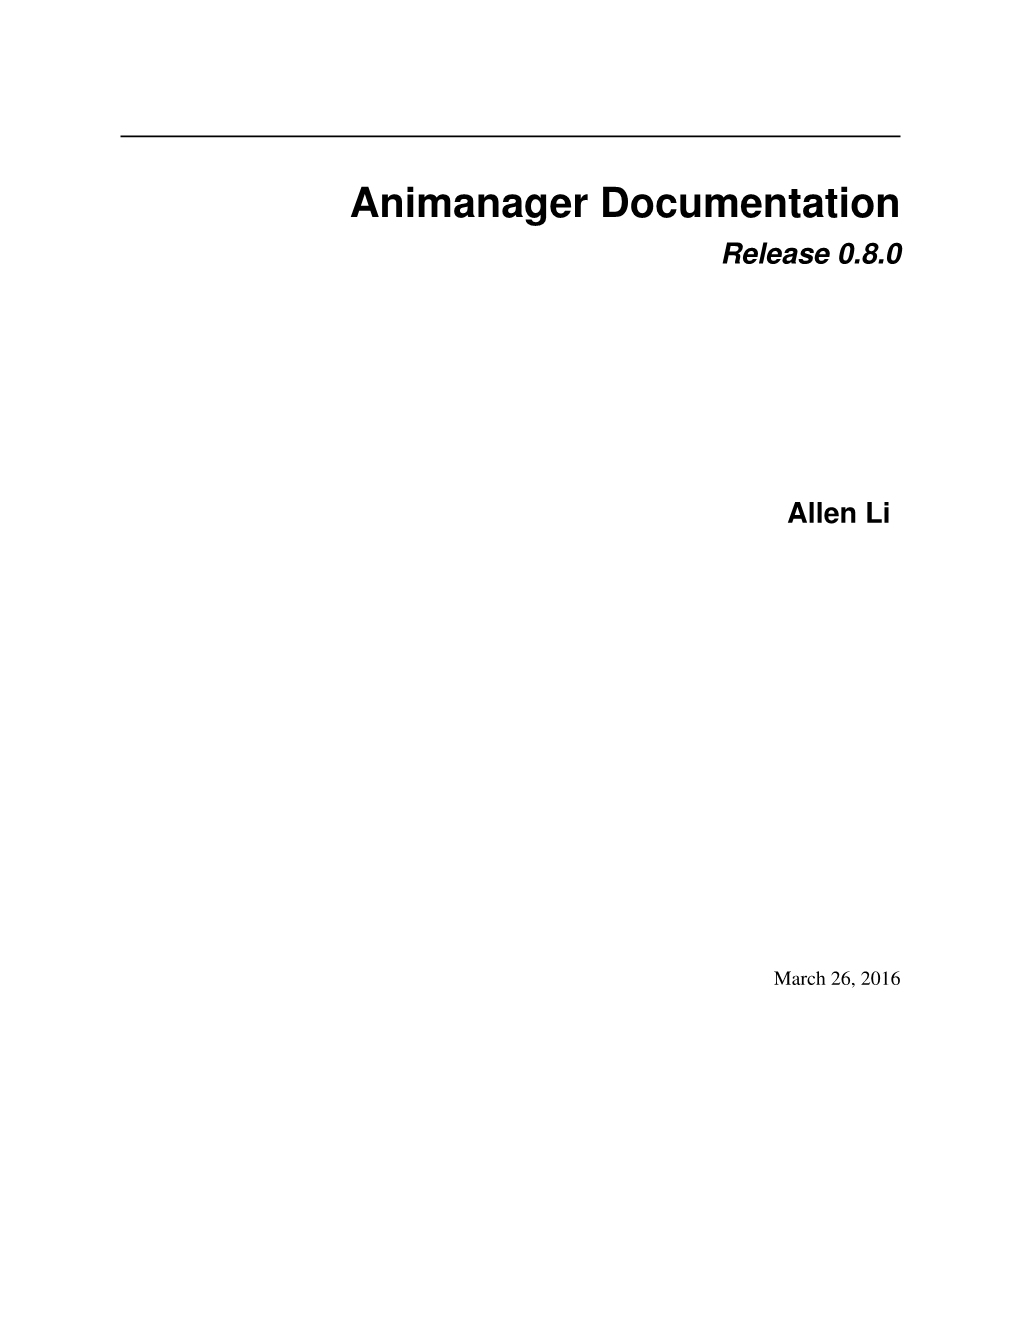 Animanager Documentation Release 0.8.0